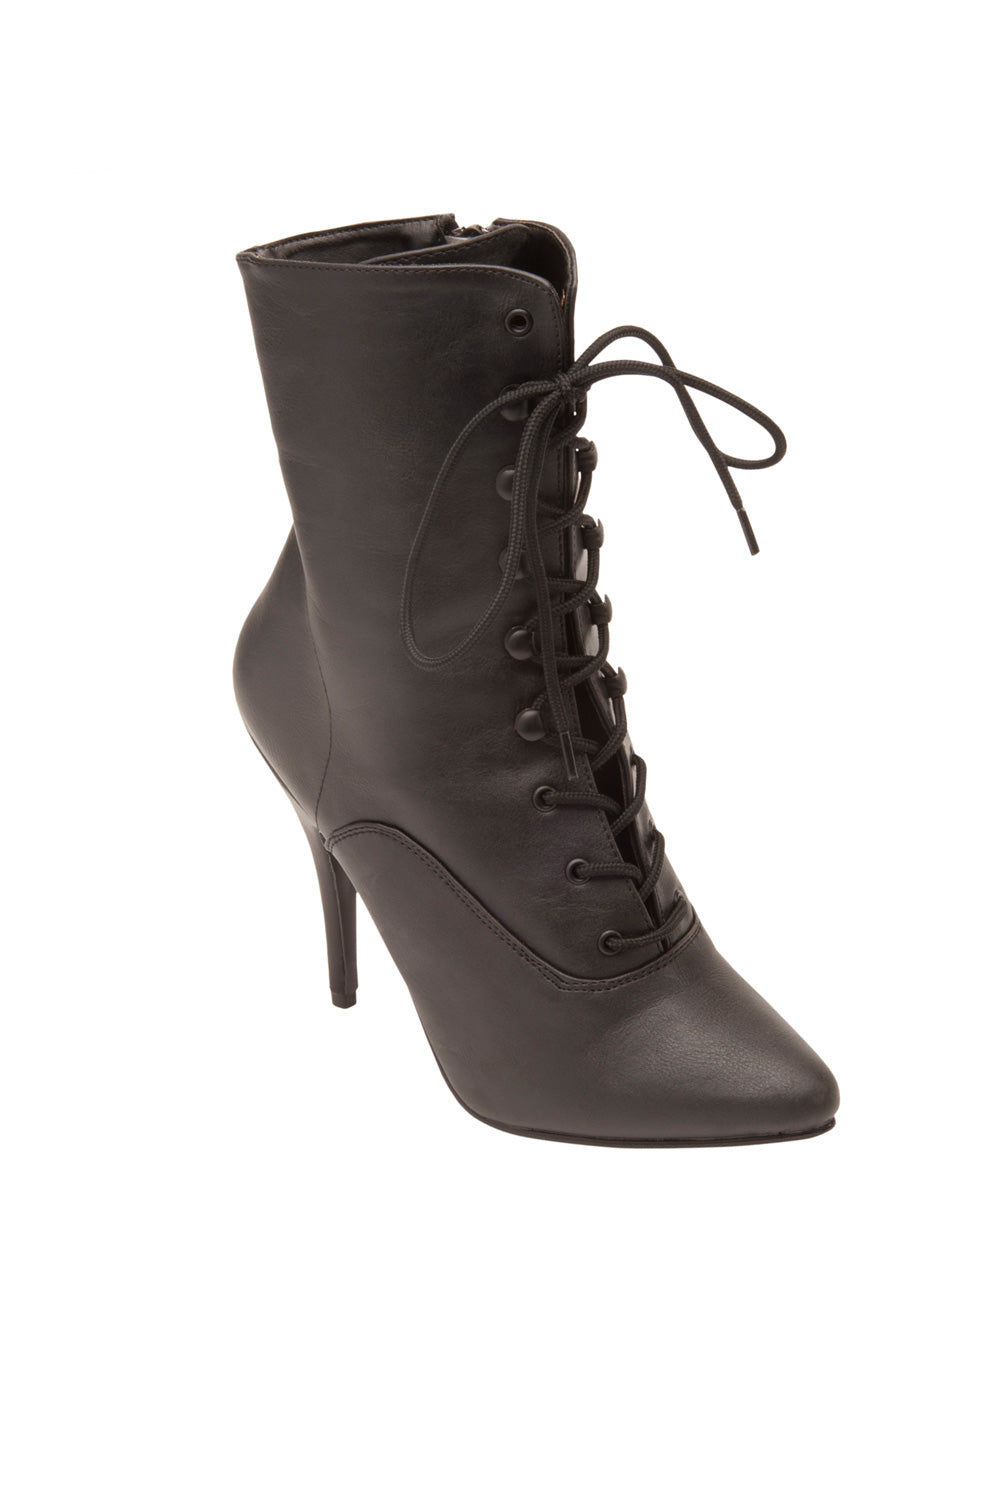 Night Shade Stiletto Lace Up Ankle Boot in Black Matte Vegan Leather ...